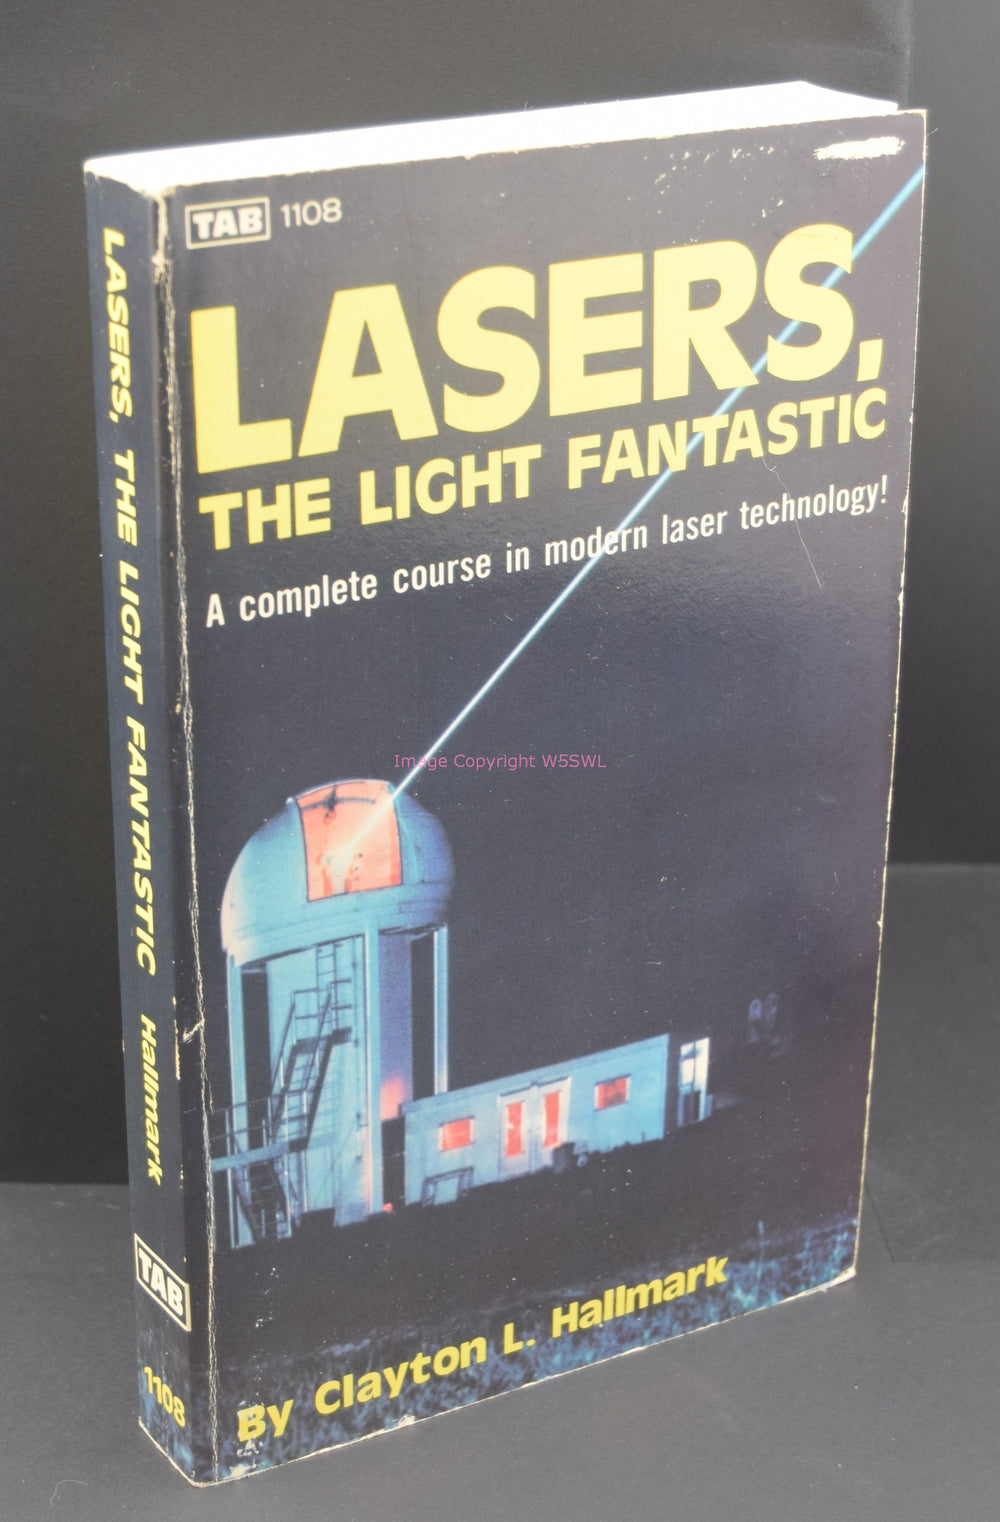 Lasers The Light Fantastic - A Complete Course In Modern Laser Technology - Dave's Hobby Shop by W5SWL